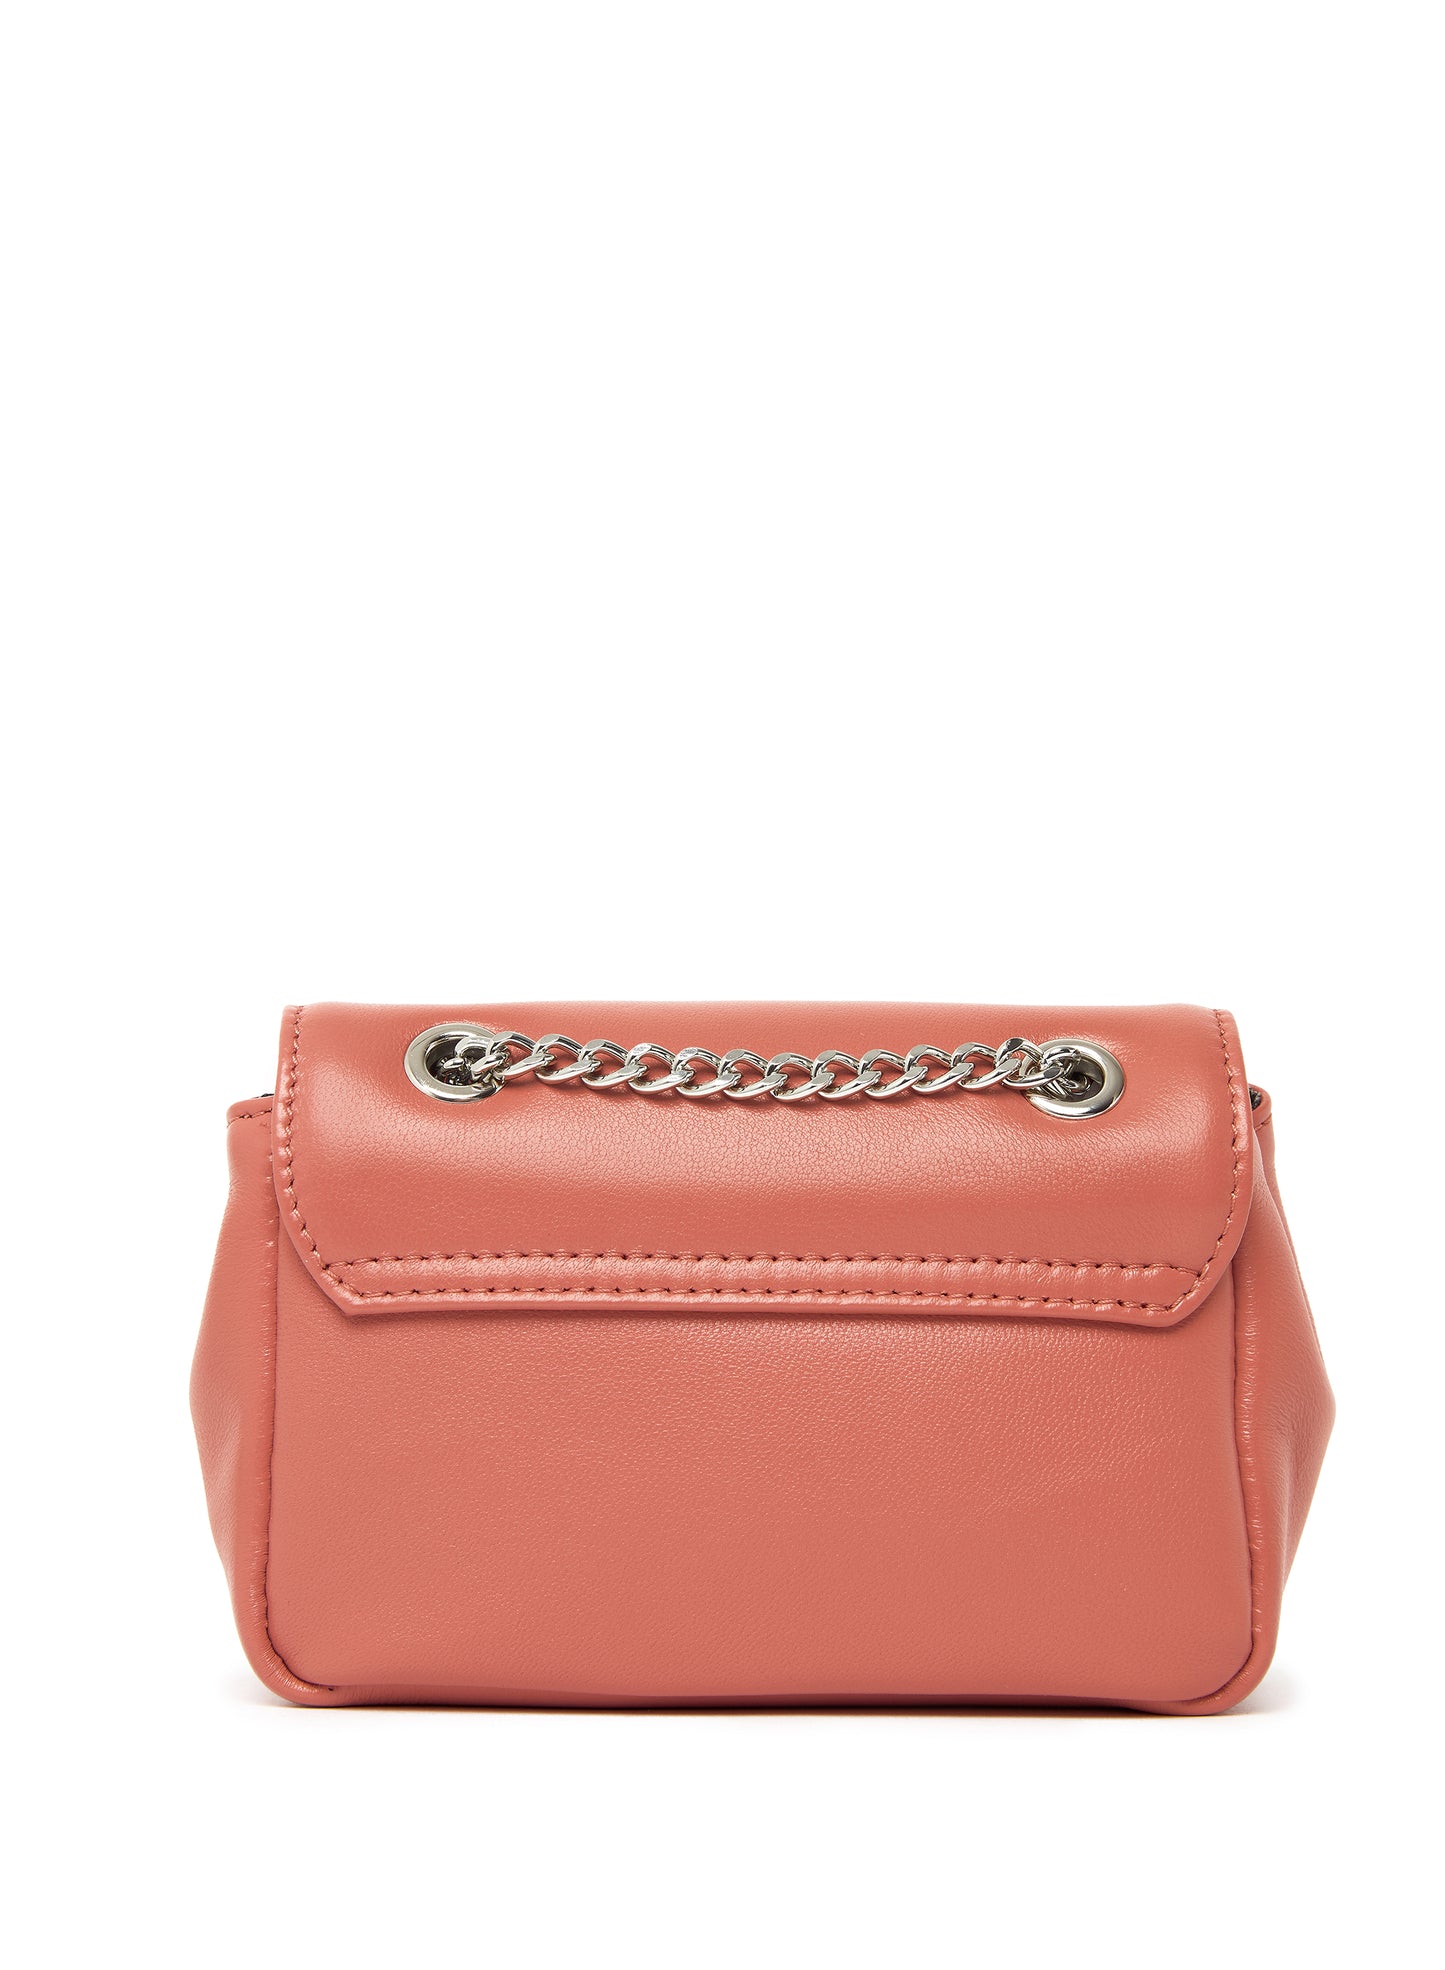 Vivienne Westwood Emma Small Purse With Chain